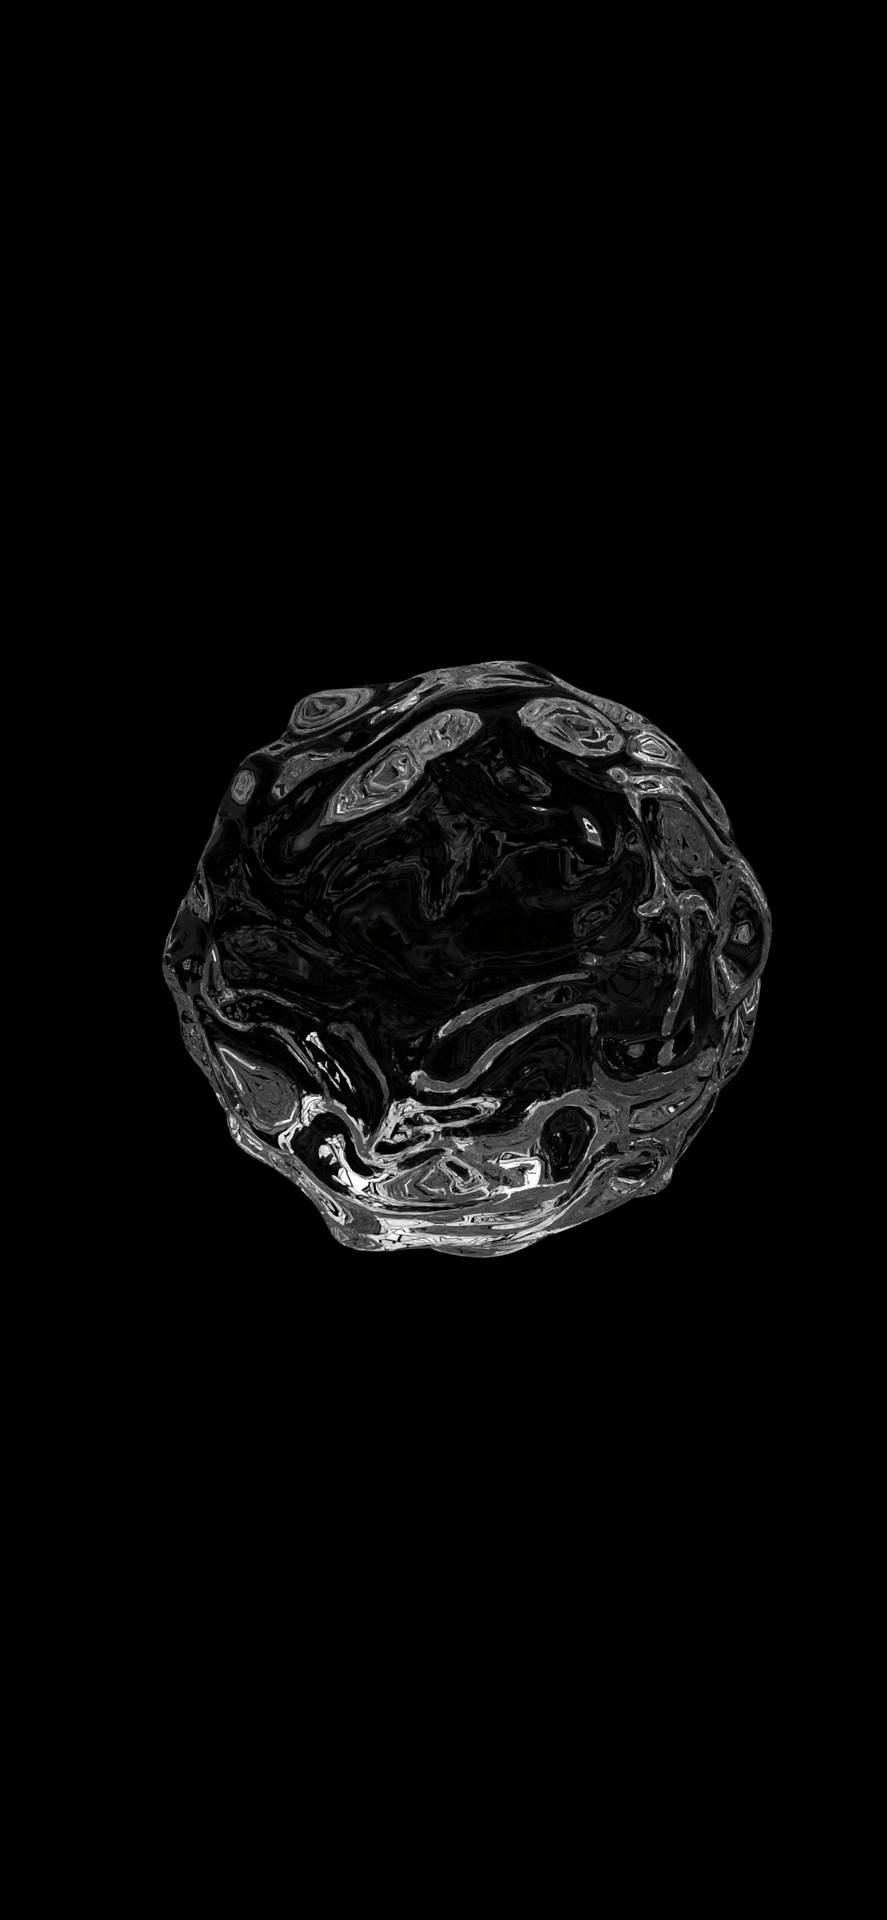 Black Rough Sphere Iphone Live Background